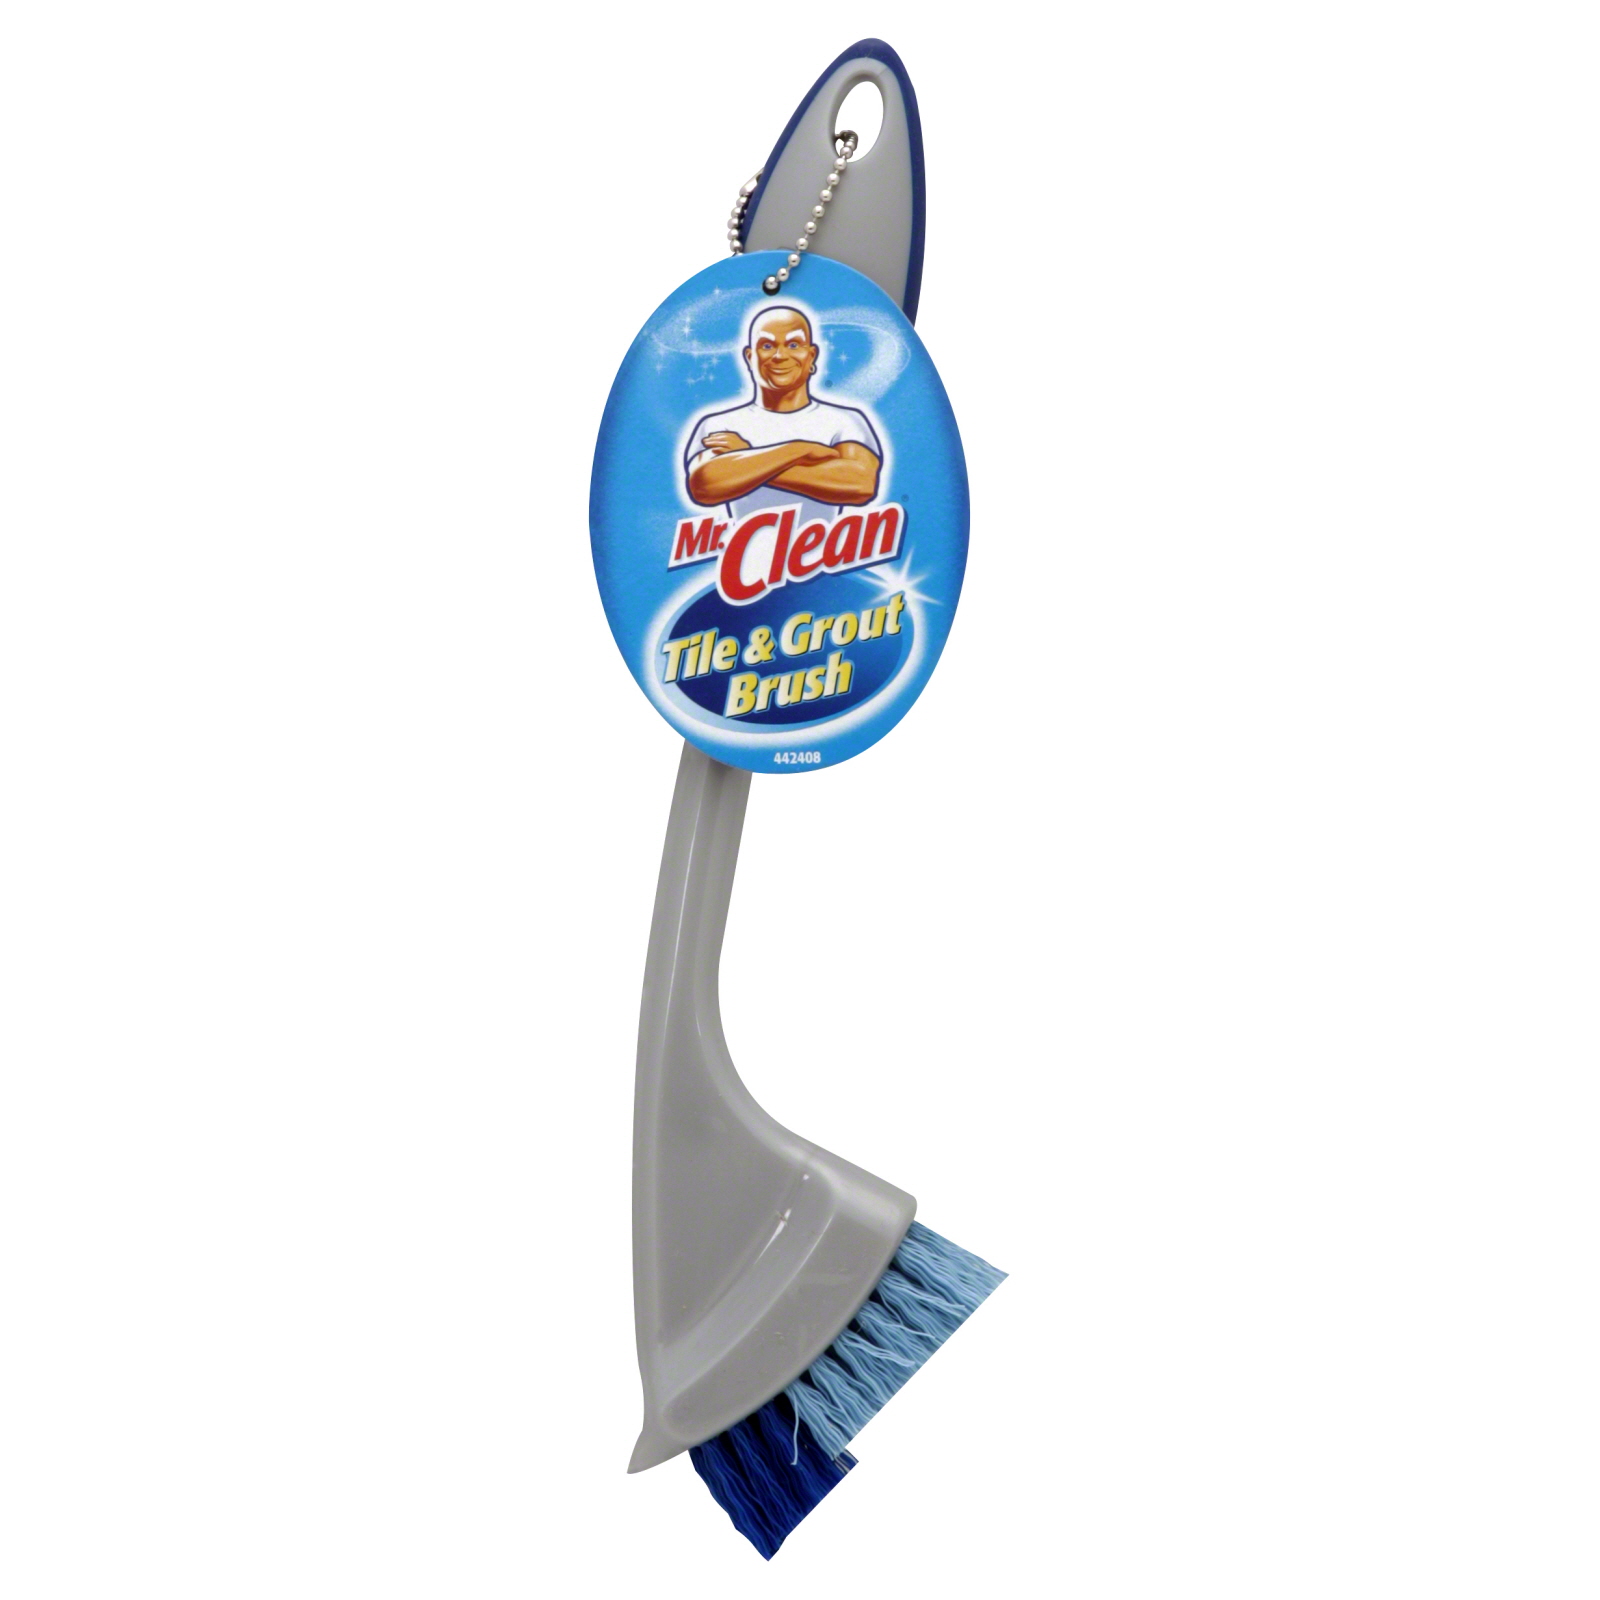 Mr. Clean 442408 Tile and Grout Brush